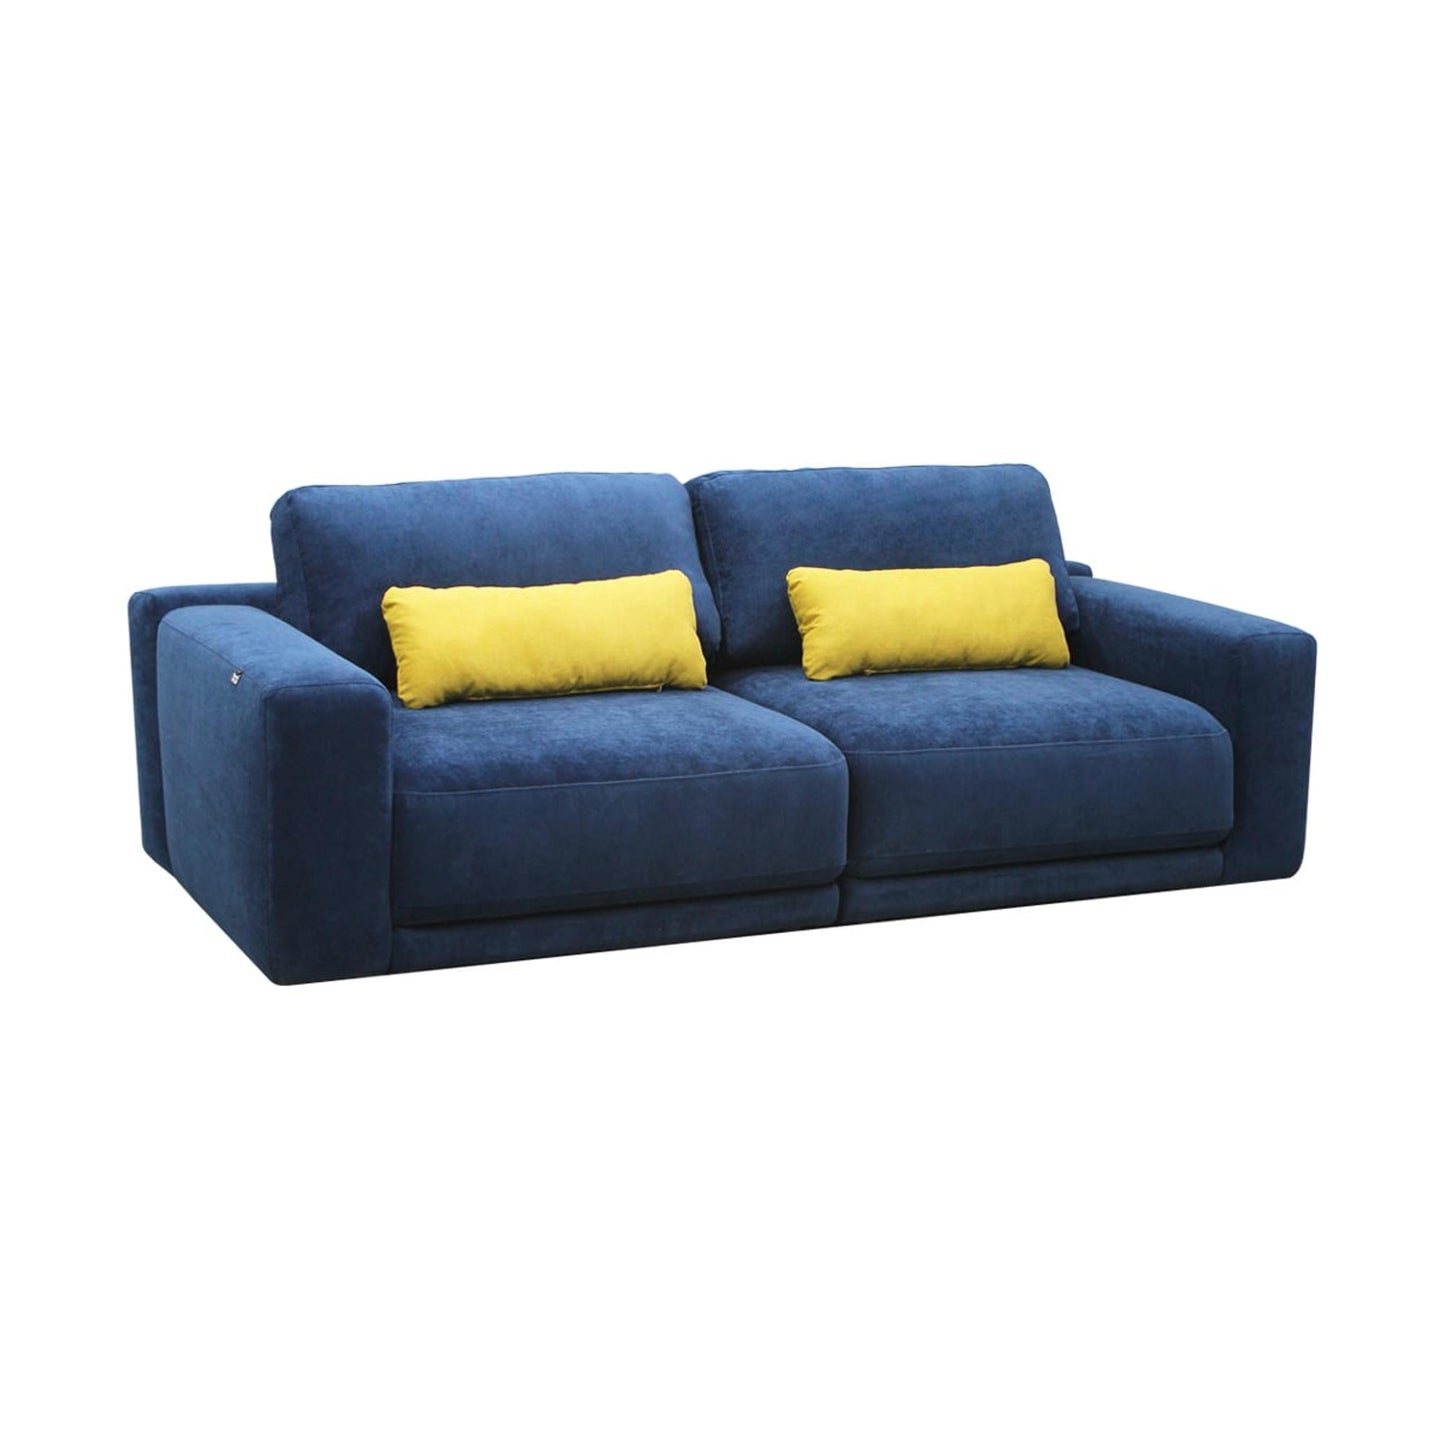 Robson Sofa Bed in Blue